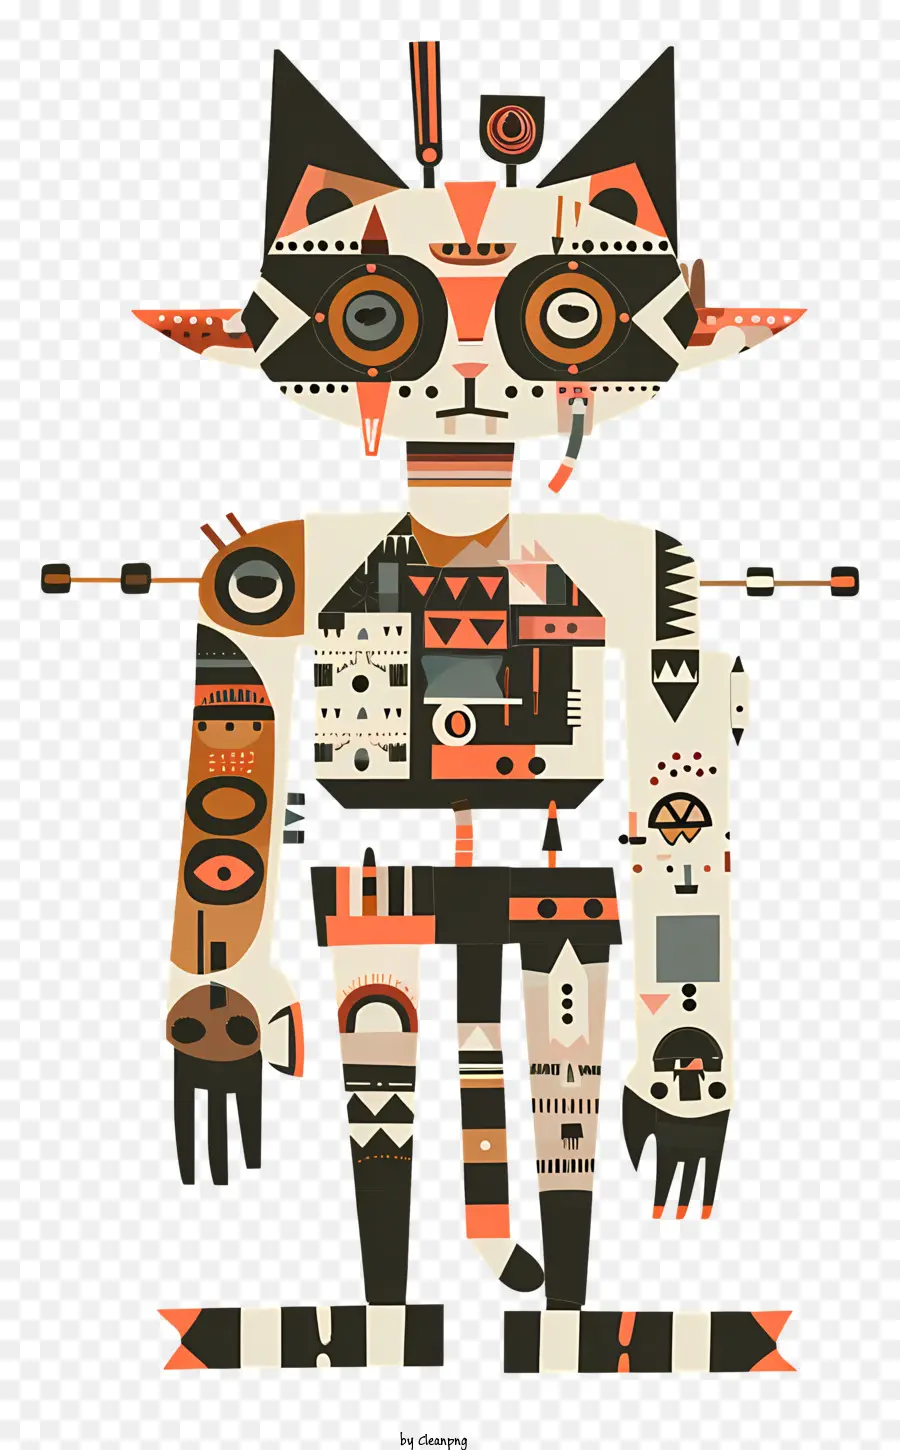 whimsical figure robot technology artificial intelligence sci-fi